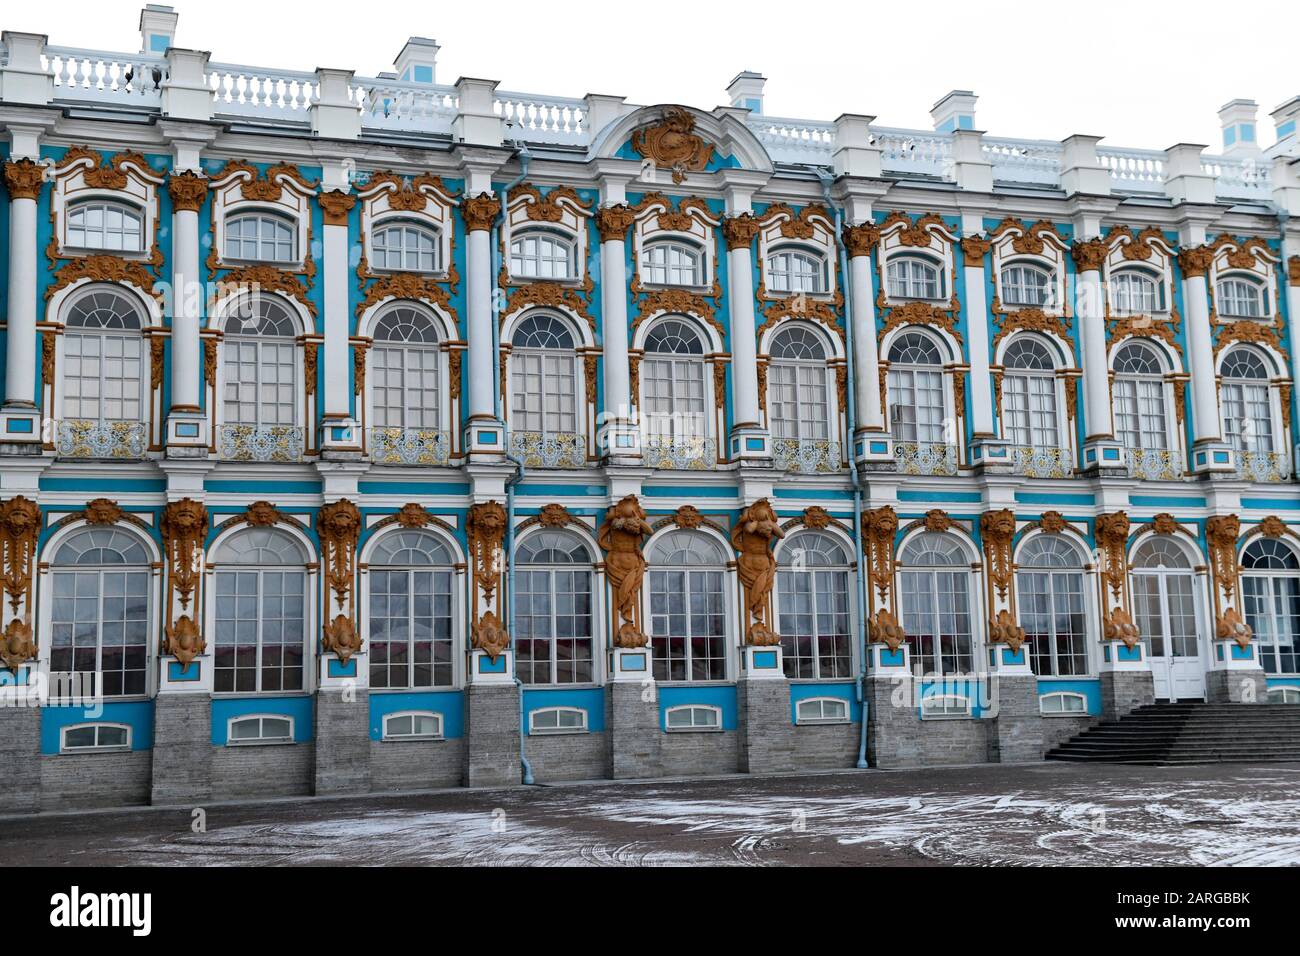 Caterine's Palace in Puschkin in St. Petersburg, Russland. Stockfoto